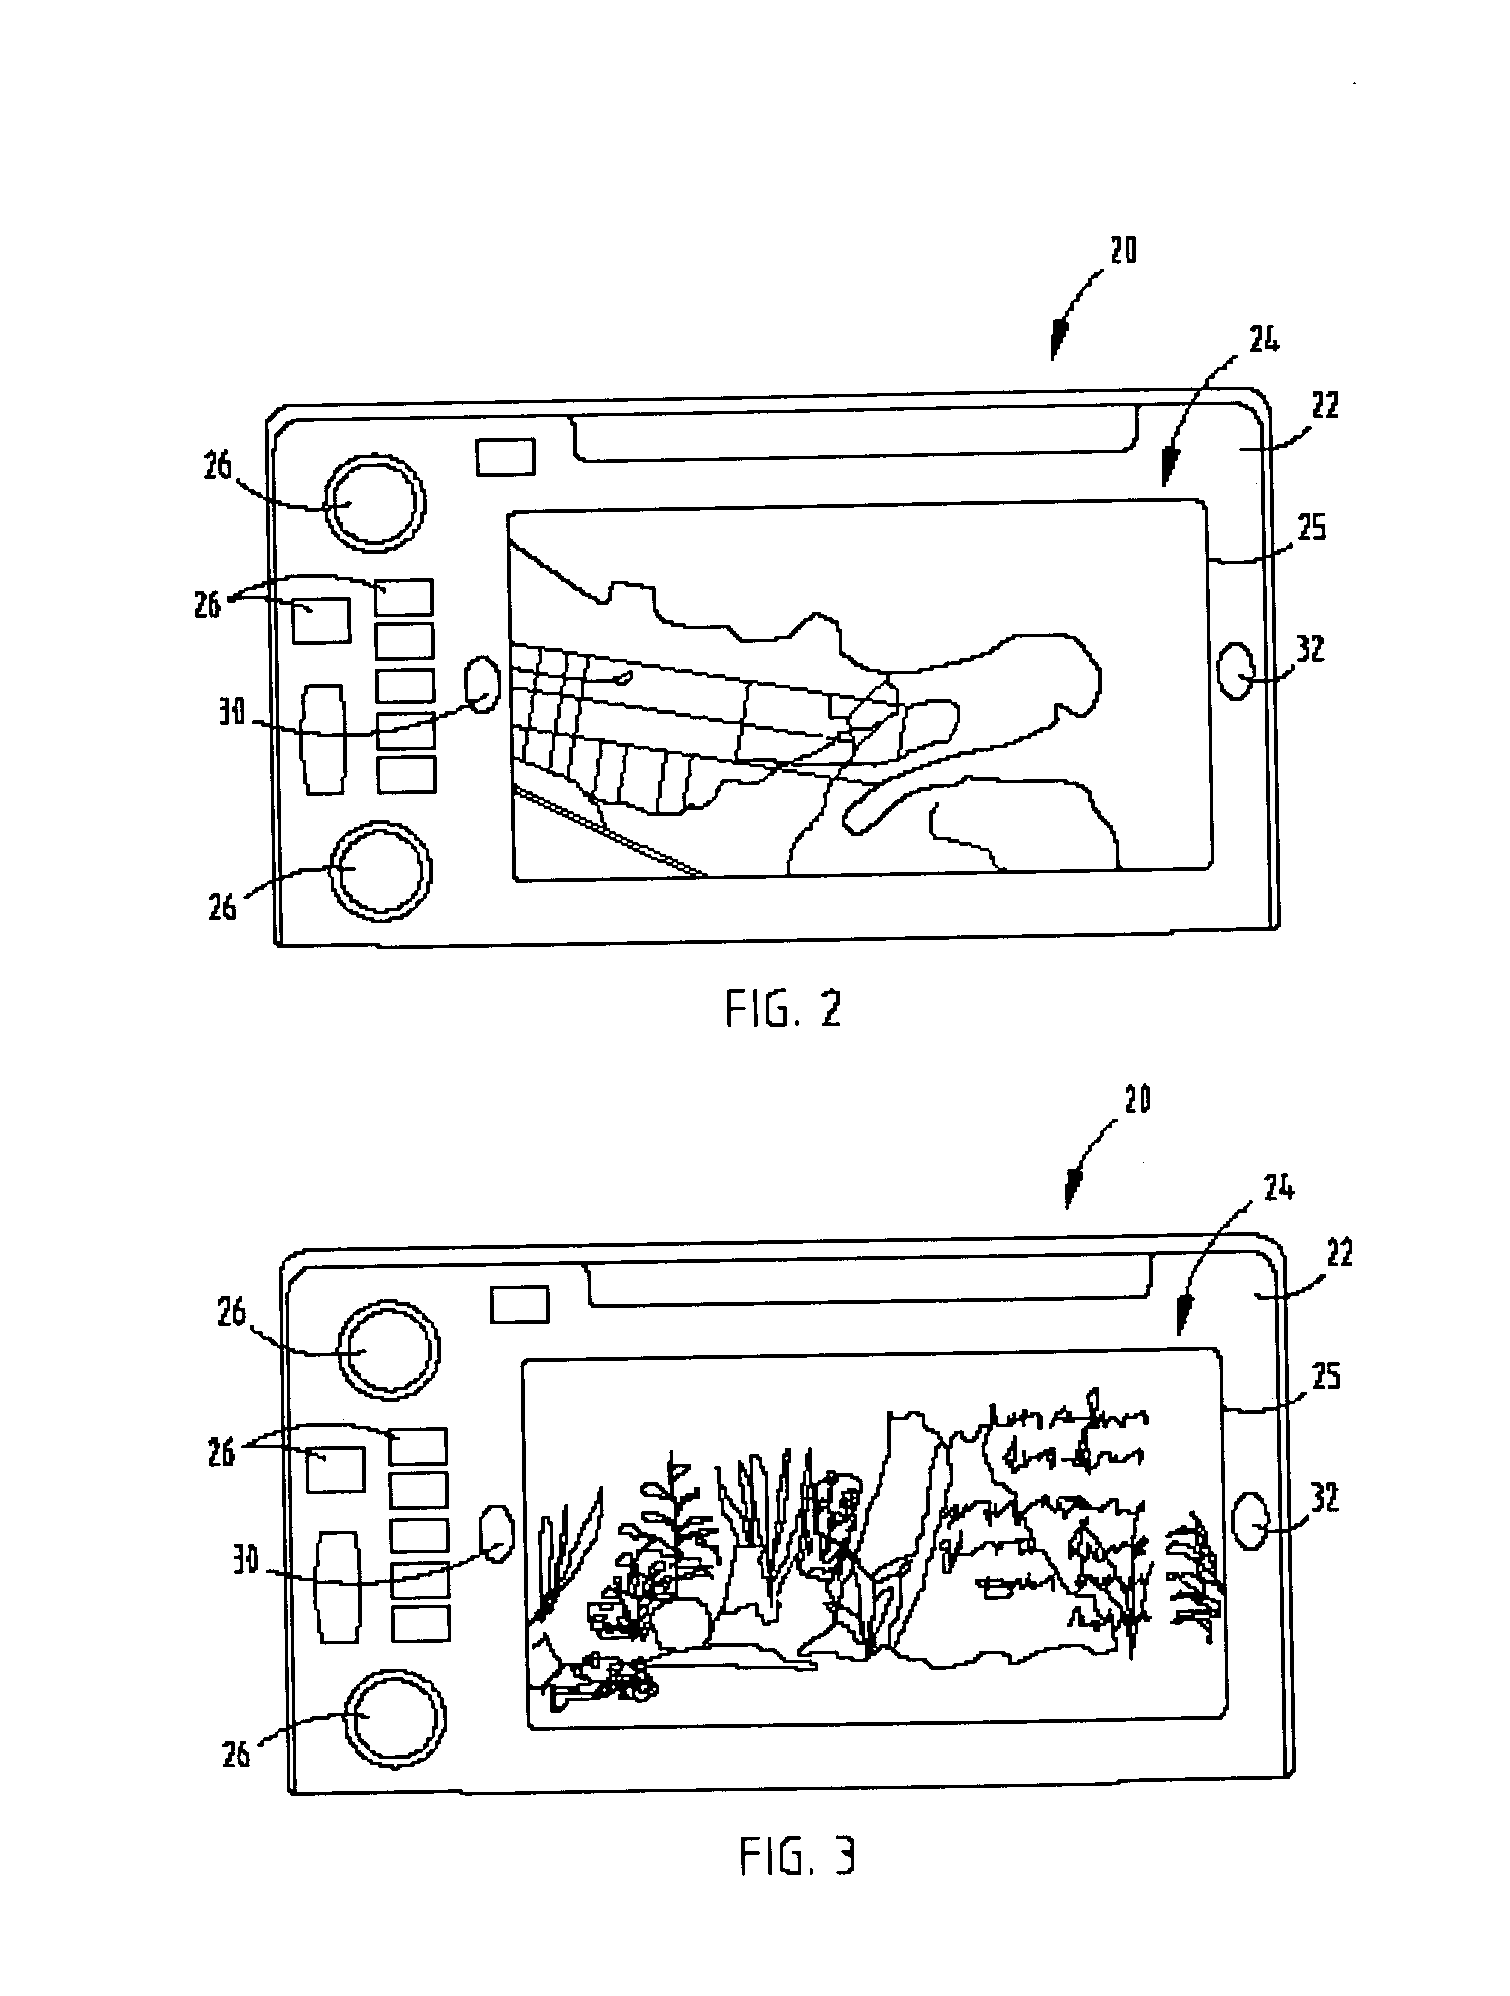 Display system having viewer distraction disable and method